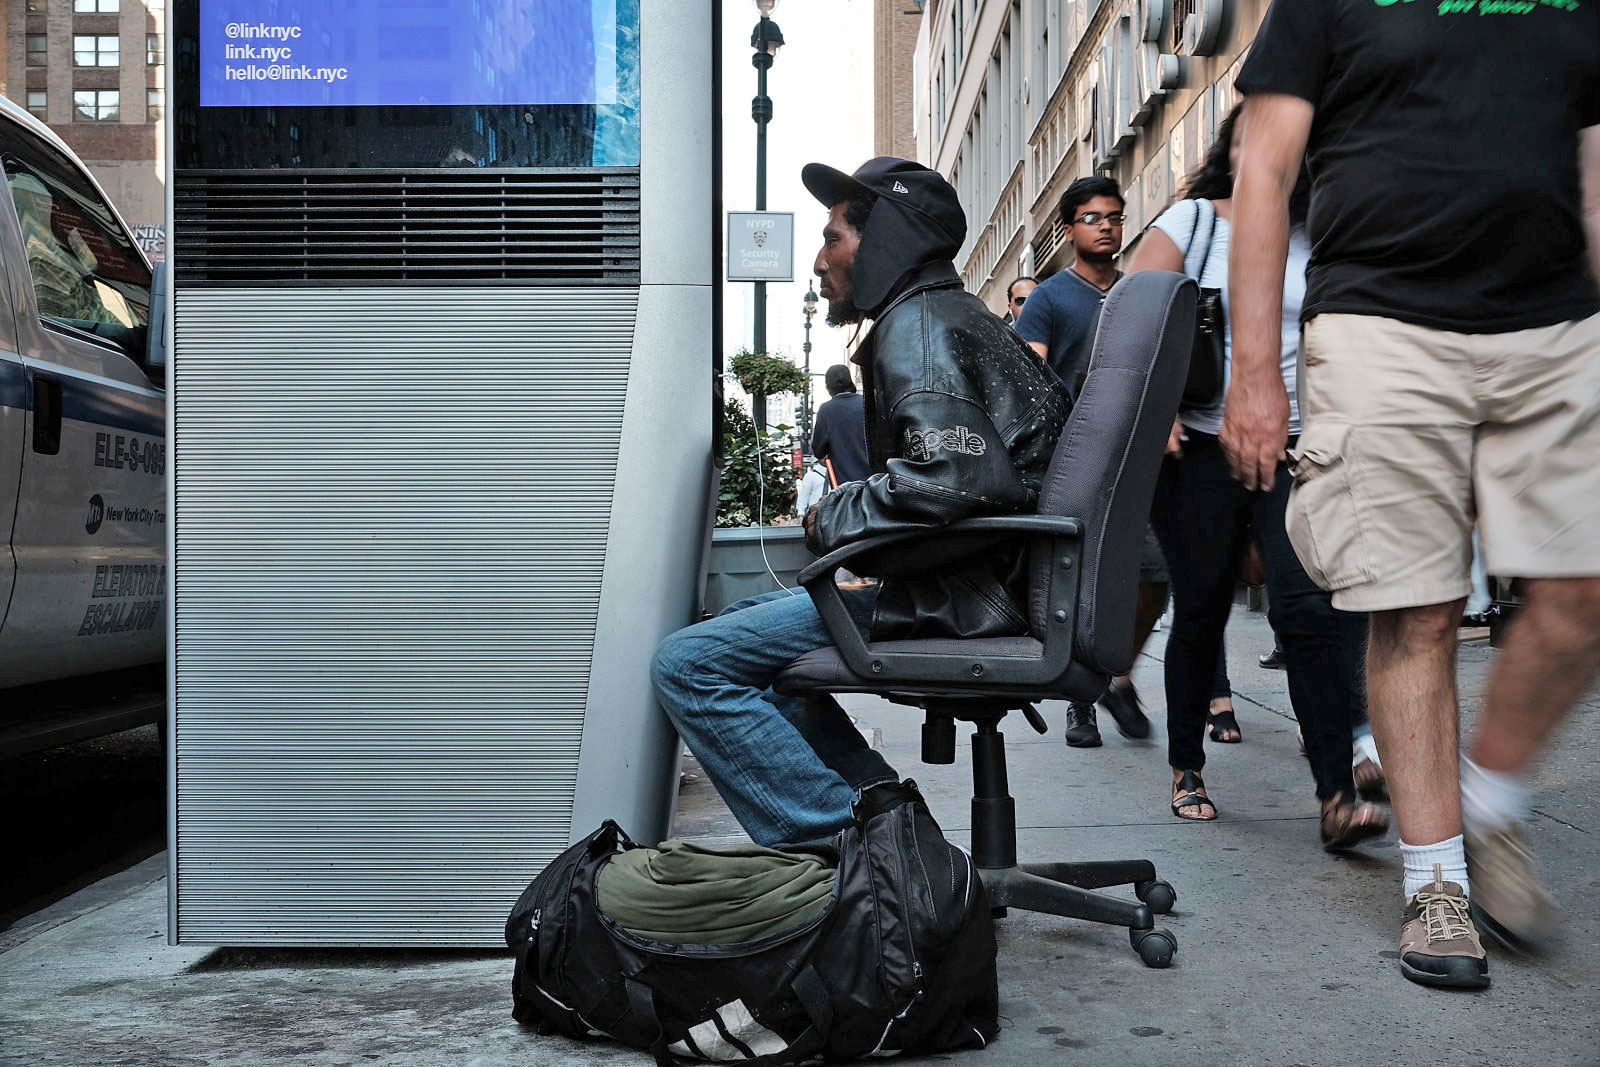 NYC nixes kiosk browsers after homeless commandeer their use1600 x 1067